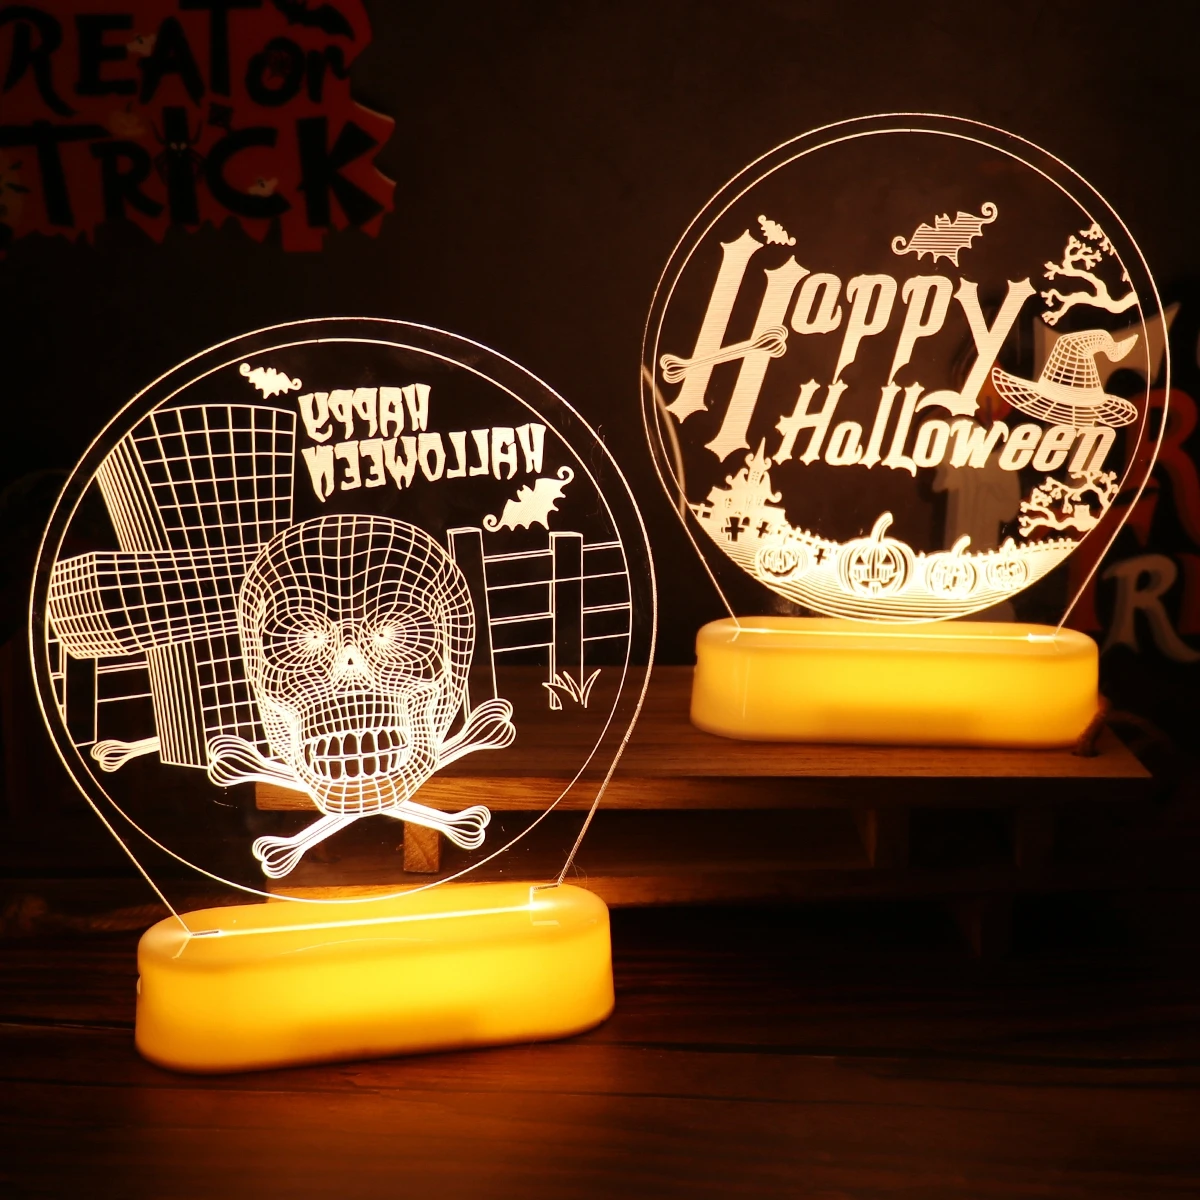 

Happy Halloween Led Night Lights Scary Skeleton Pumpkin 2021 Halloween Party Decor For Home Trick Or Treat Horror Party Supplies